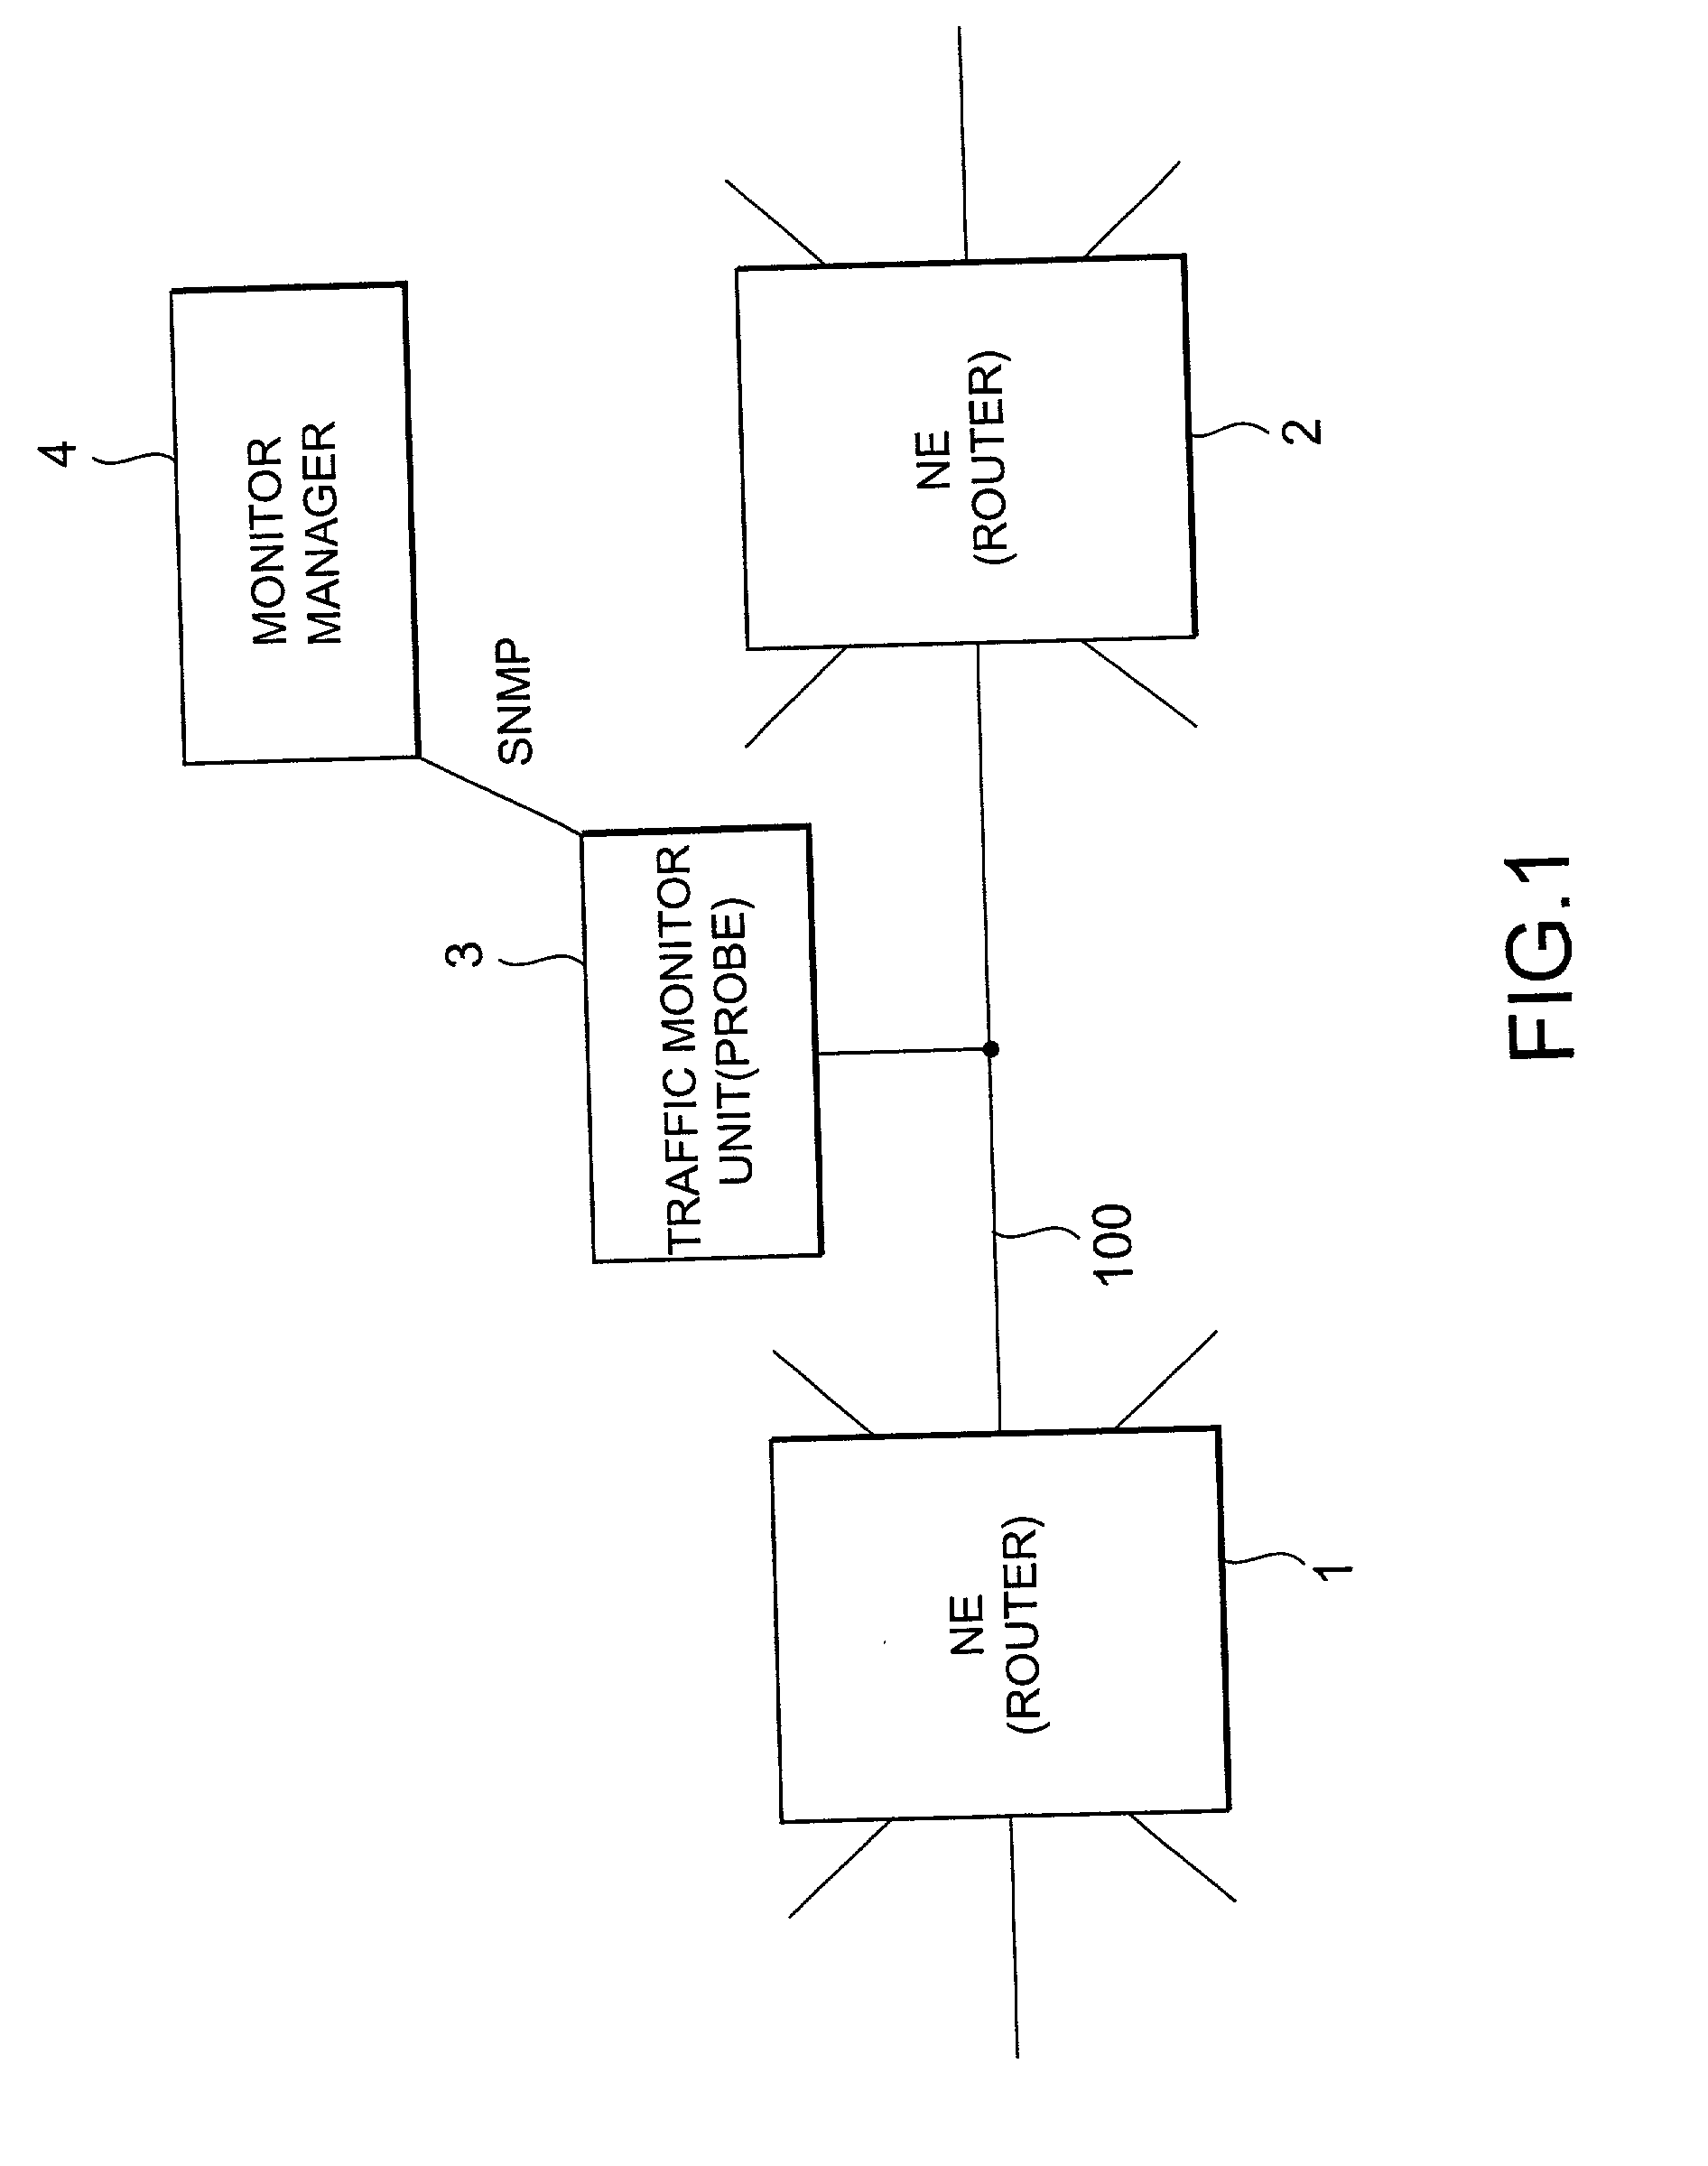 Network traffic monitoring system and monitoring method